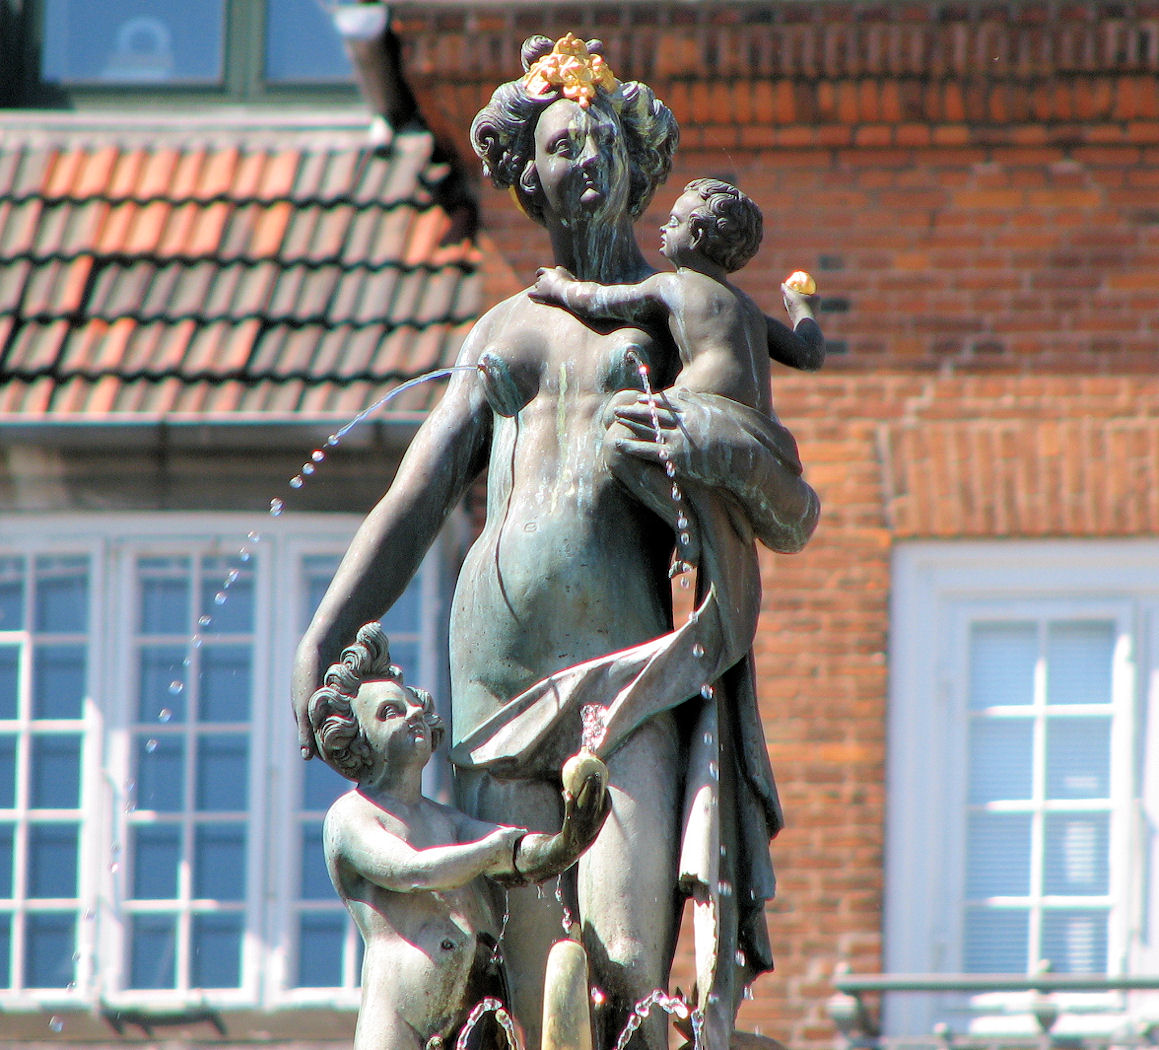 naked lady statue with water squirting out of her breasts